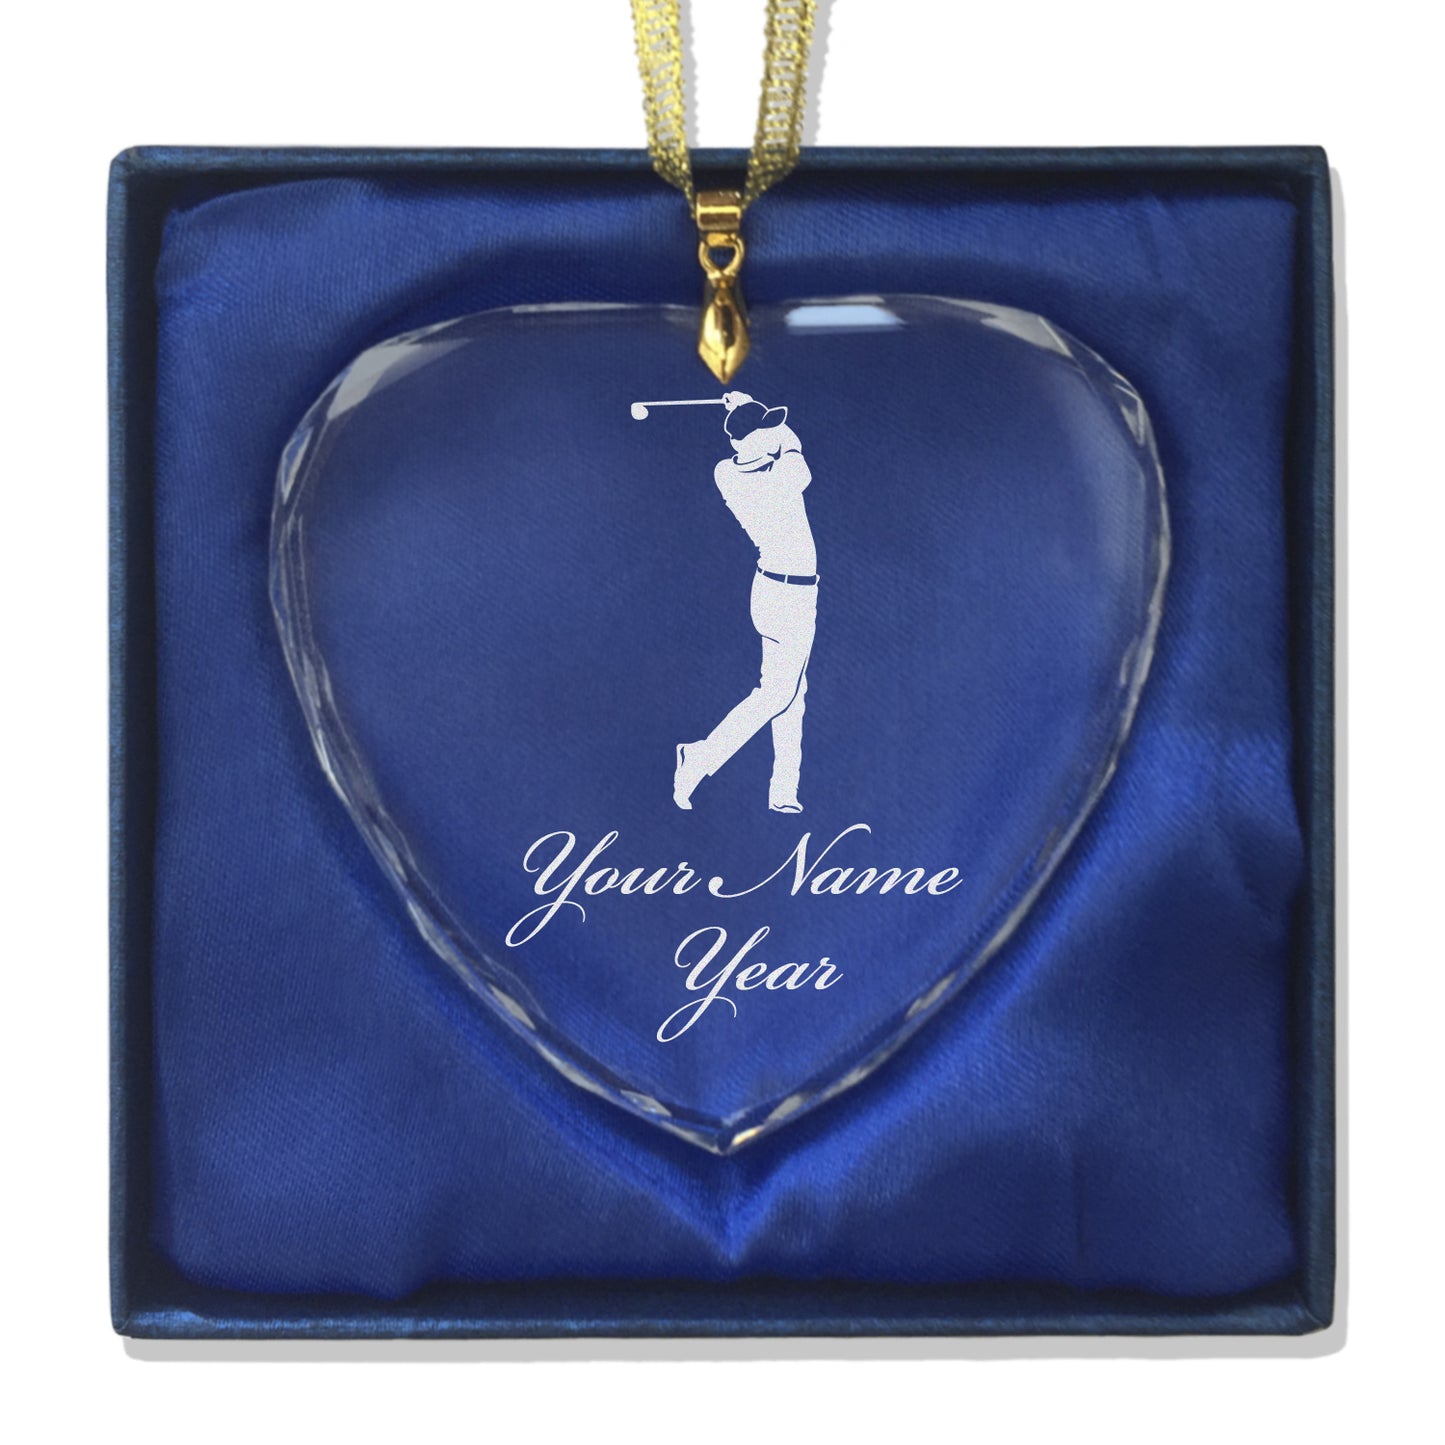 LaserGram Christmas Ornament, Golfer Golfing, Personalized Engraving Included (Heart Shape)